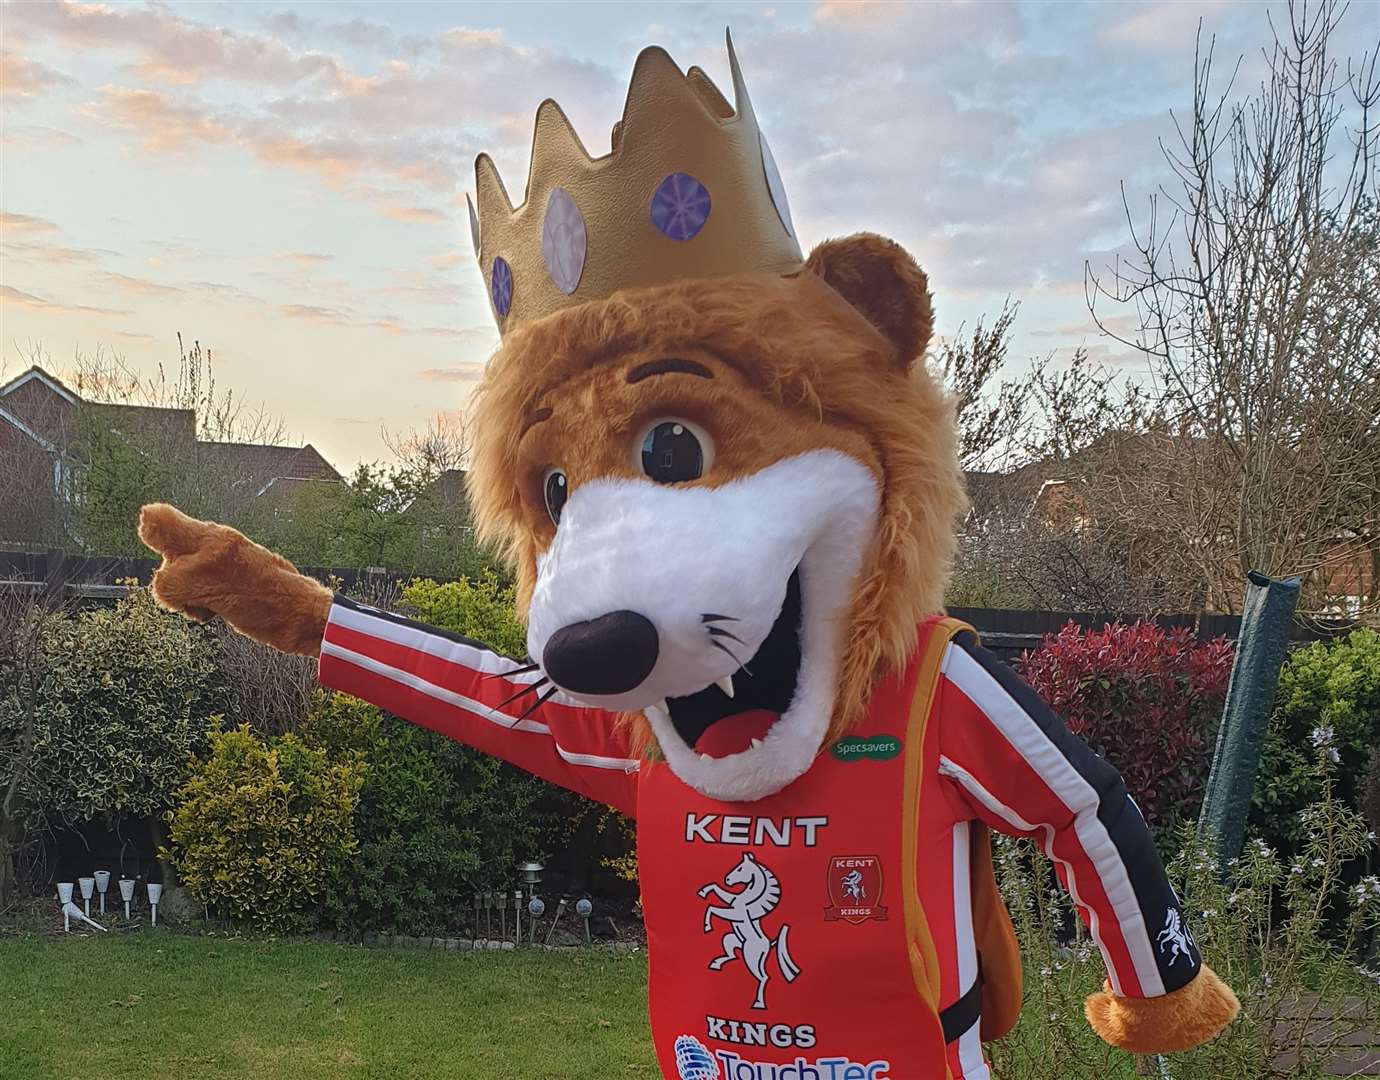 Kent Kings have a new mascot too for when the season gets underway